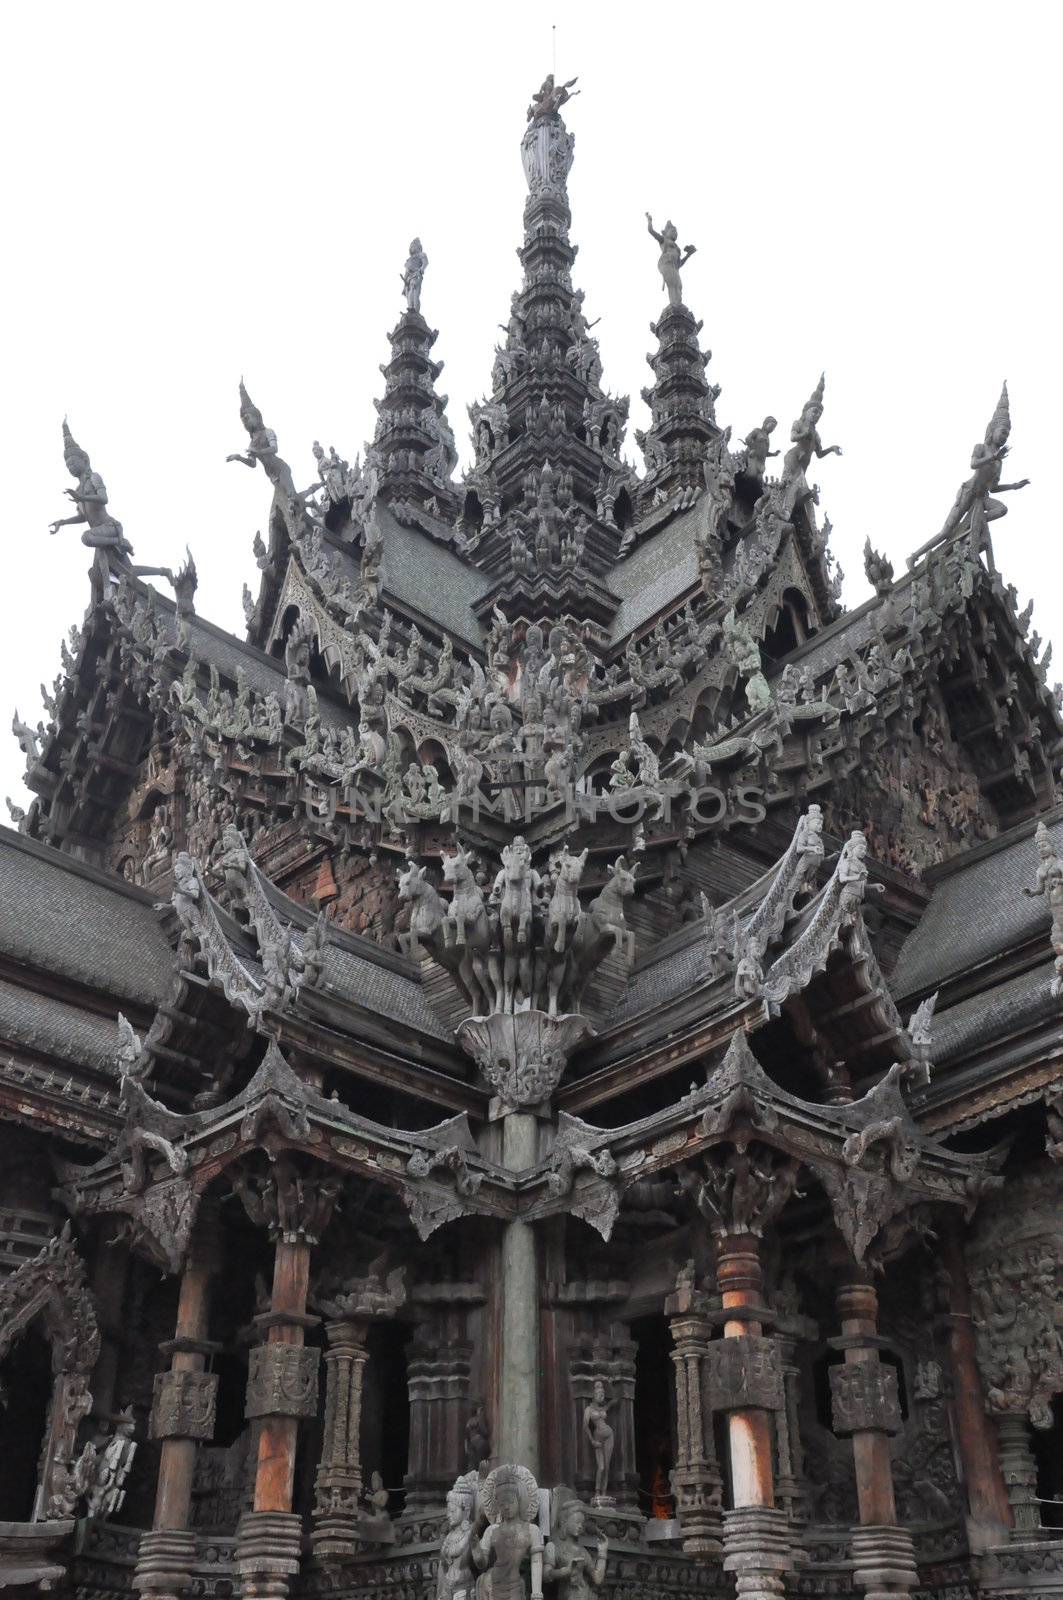 Sanctuary of Truth in Pattaya, Thailand